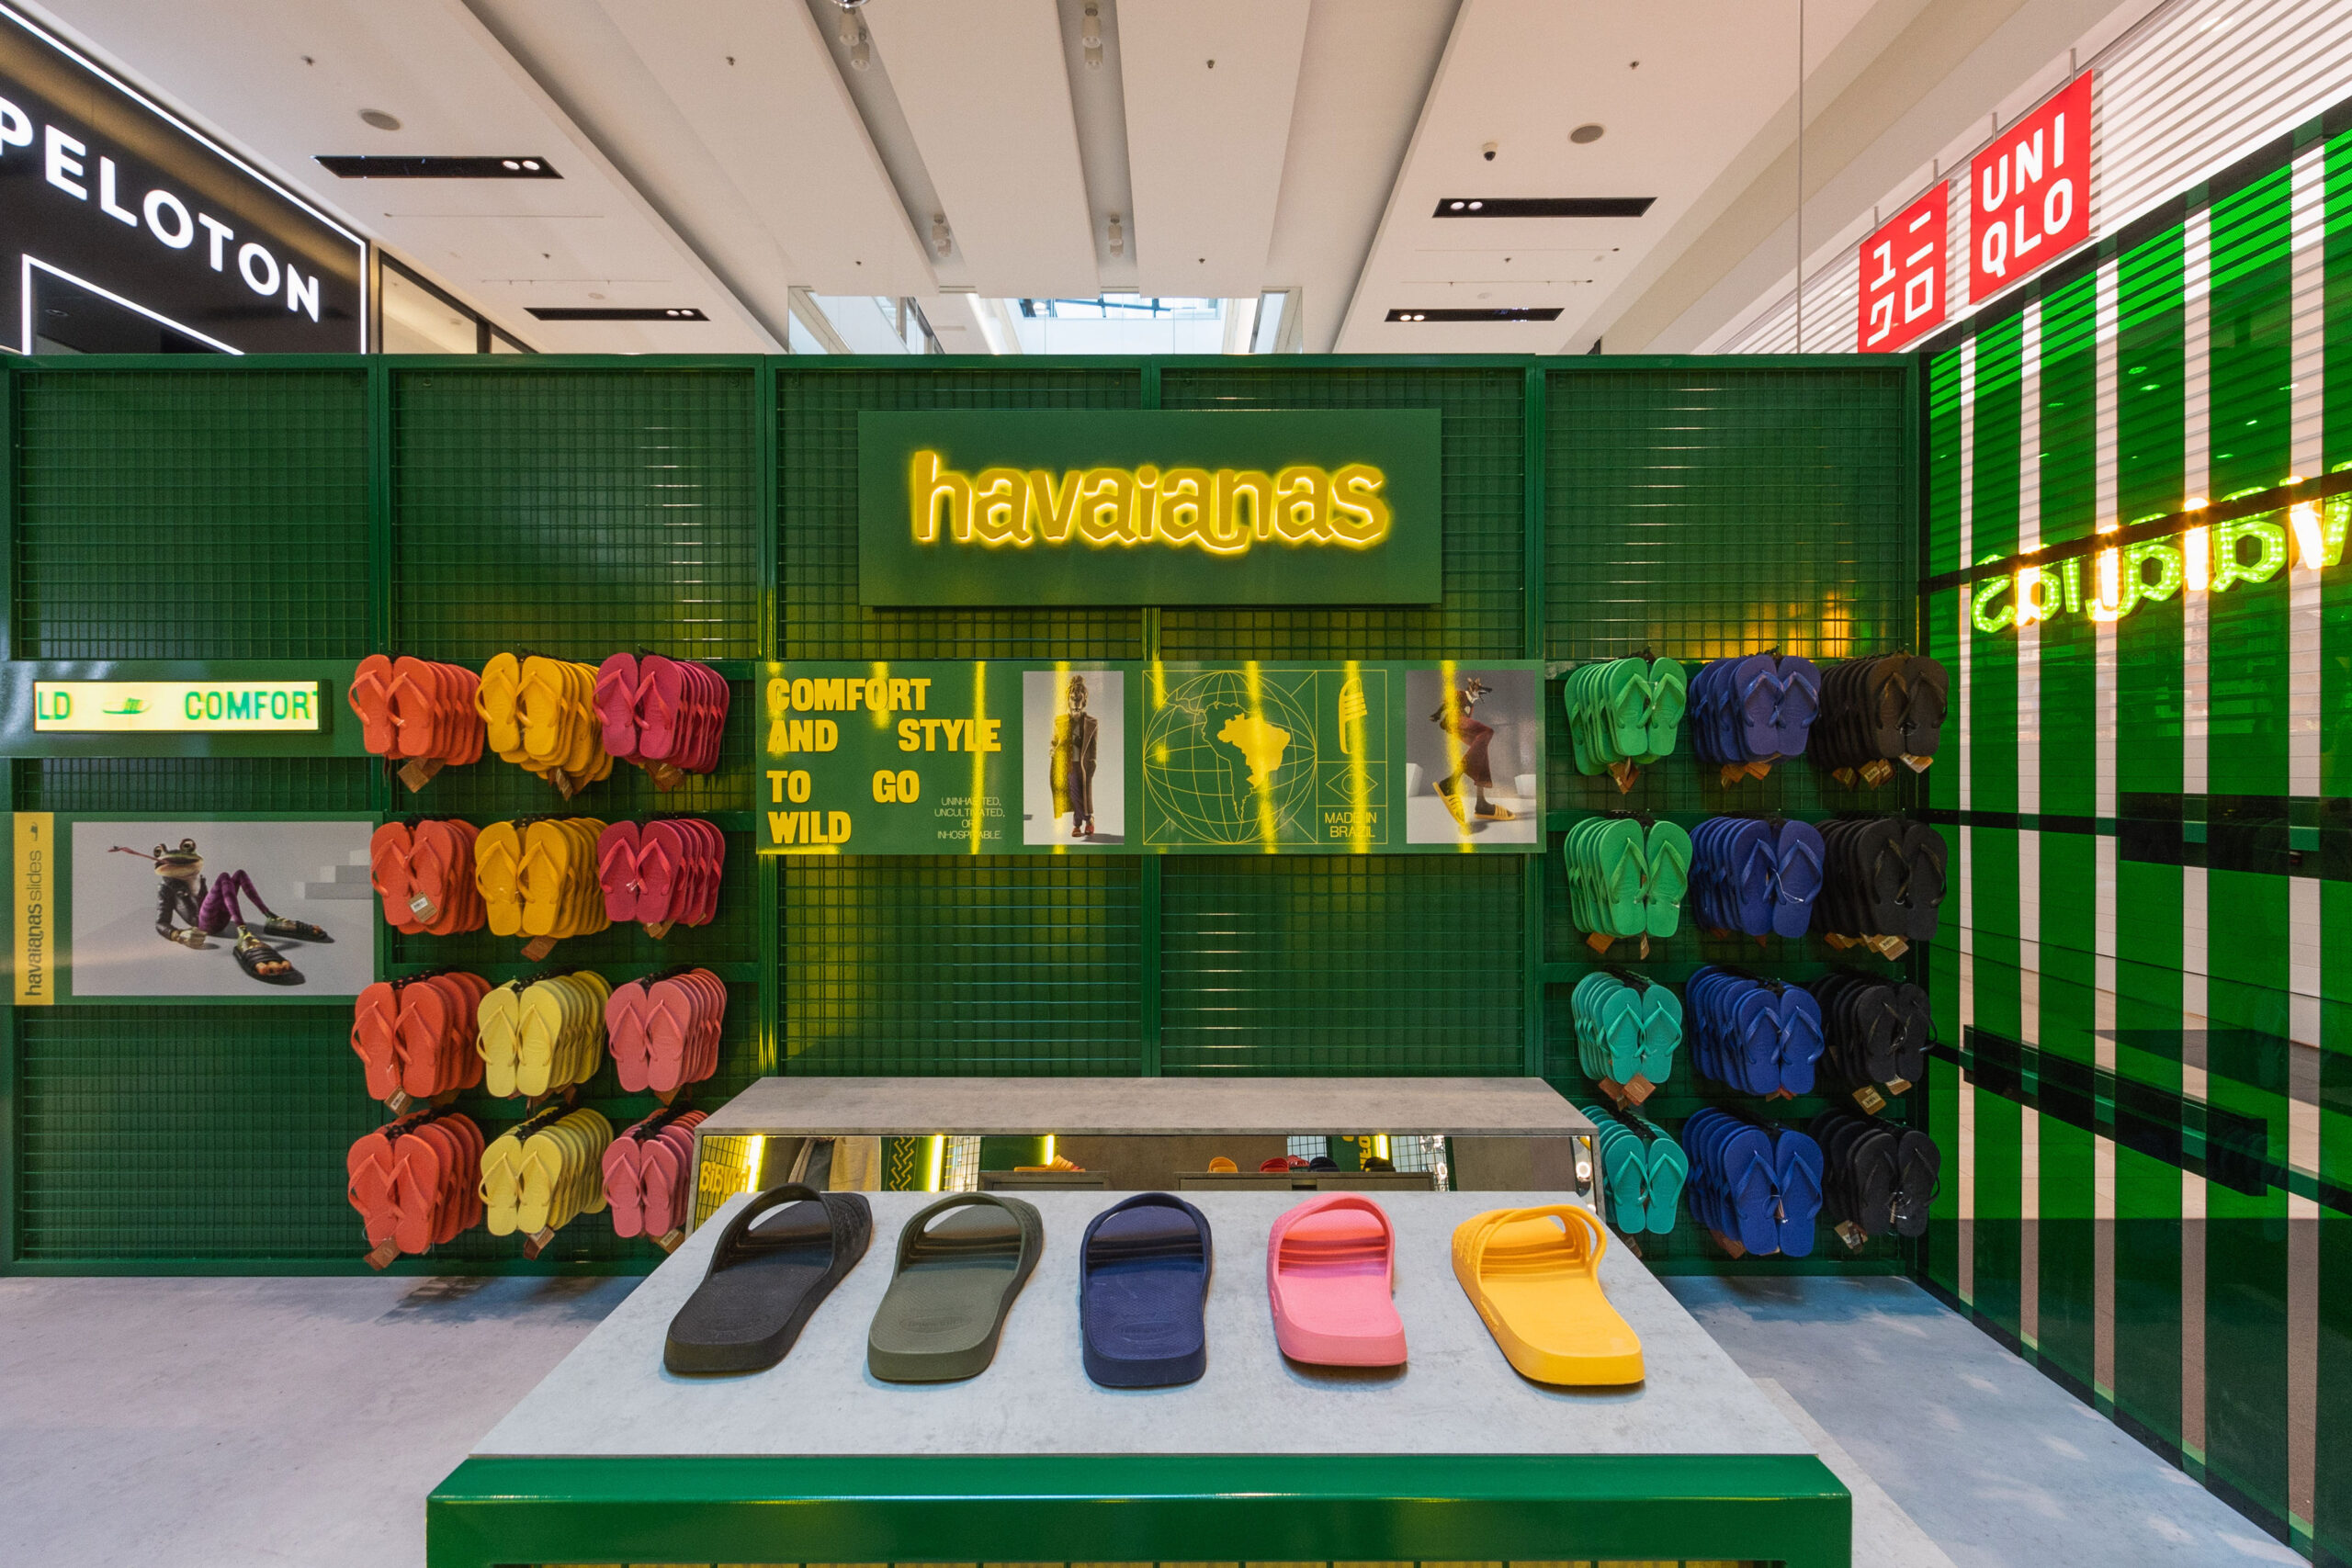 Pop-Up Brand Activation For Havaianas by Little and Large Events. Displayed on the back wall is a large yellow, backlit logo on a green mesh wall with displays of colourful slides on either side.